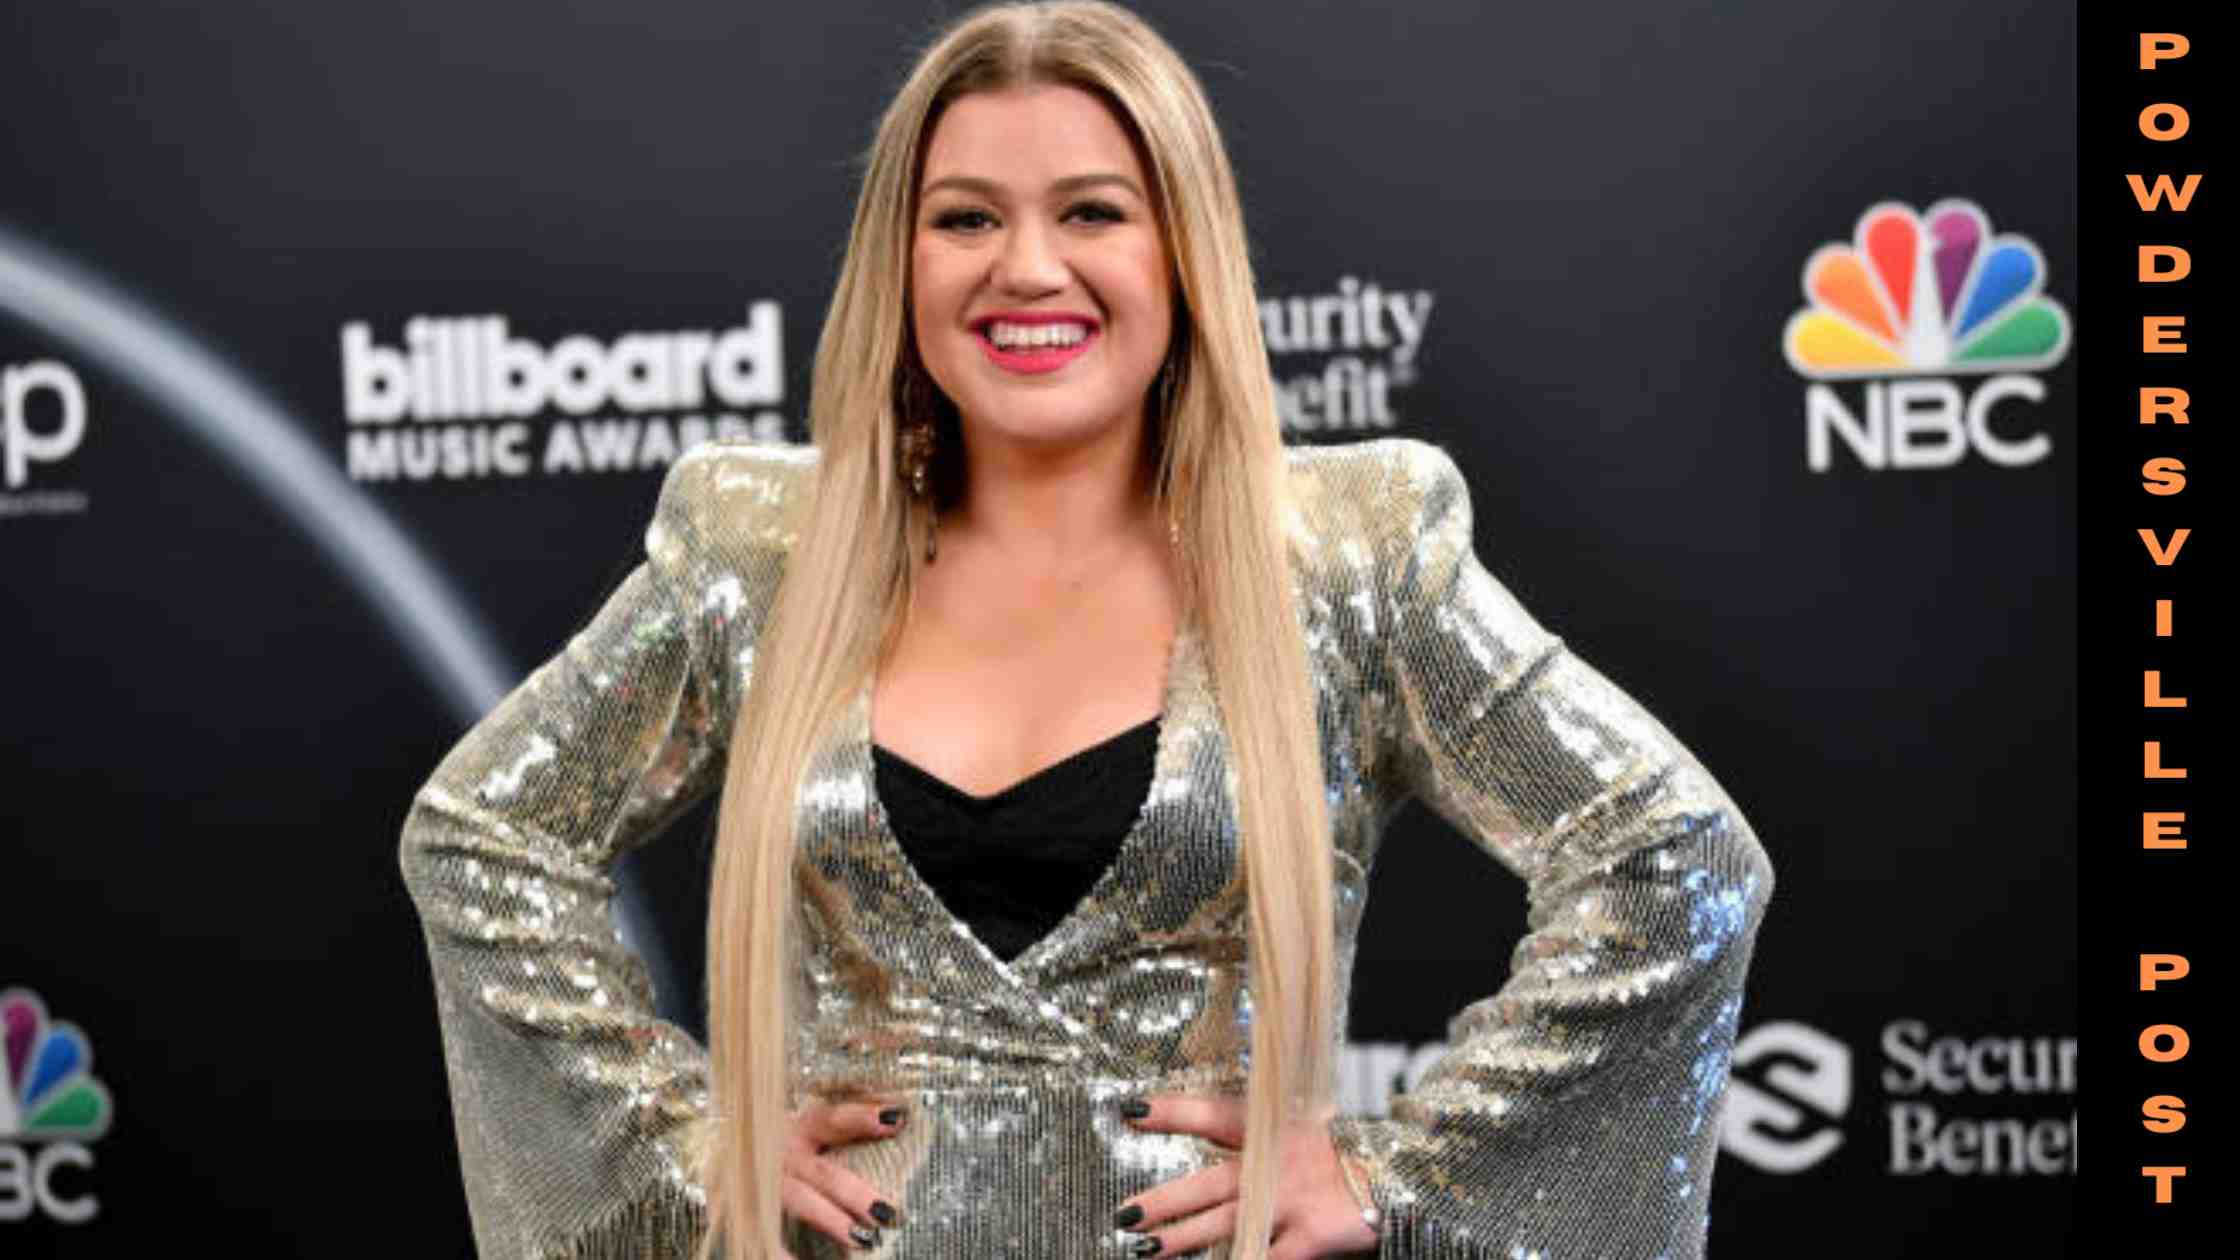 All You Need To Know About Famous American Singer Kelly Clarkson's Net